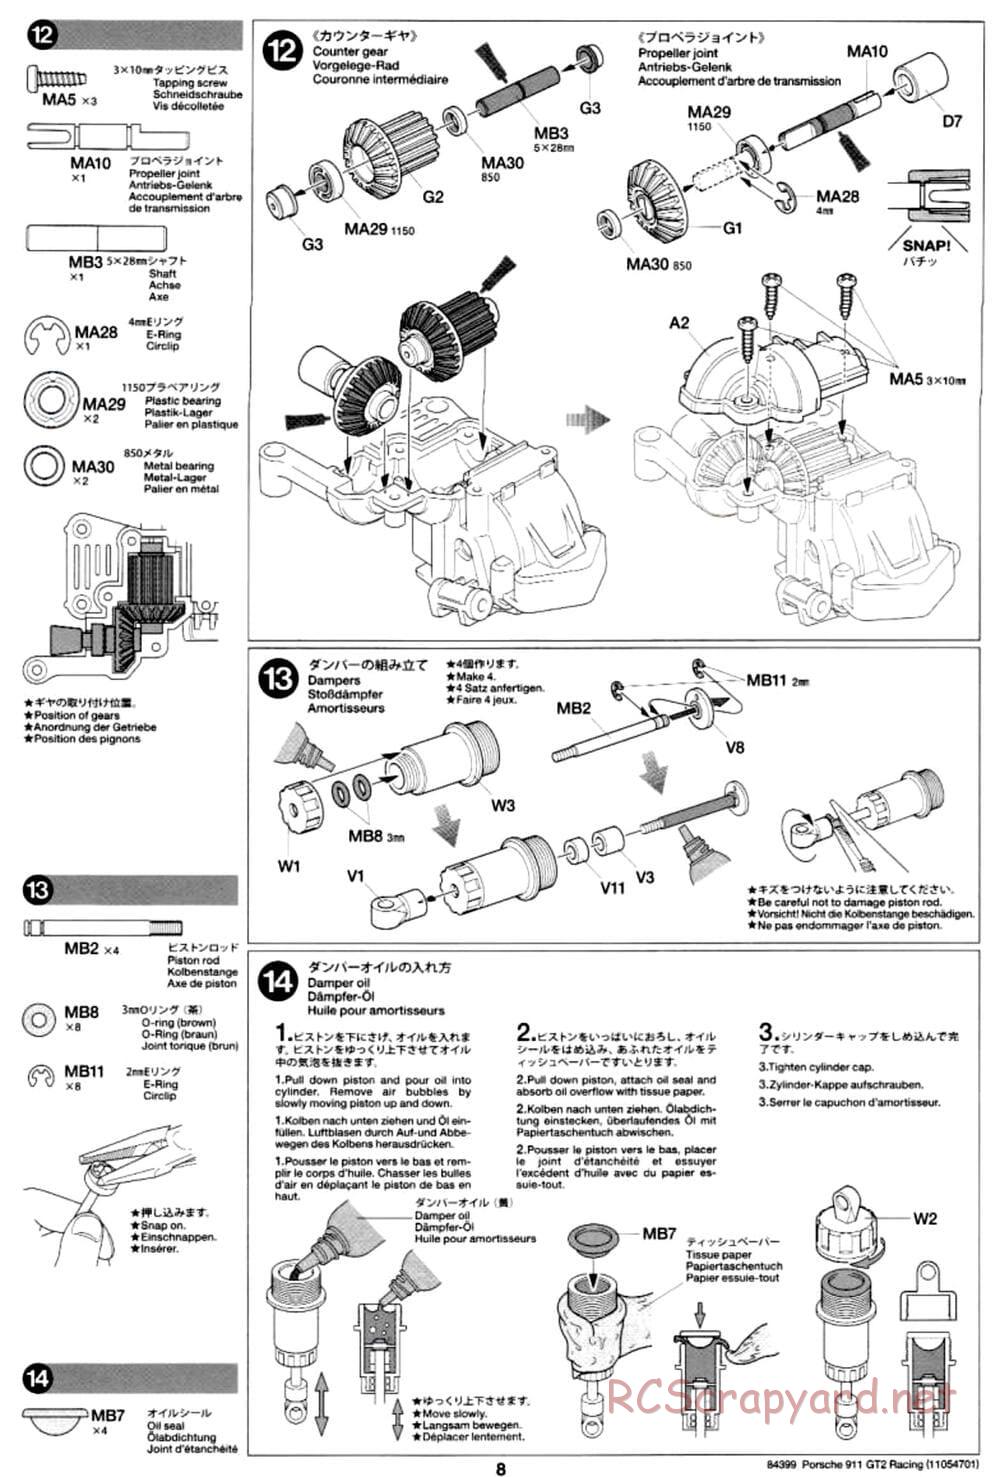 Tamiya - Porsche 911 GT2 Racing - TA02SW Chassis - Manual - Page 8